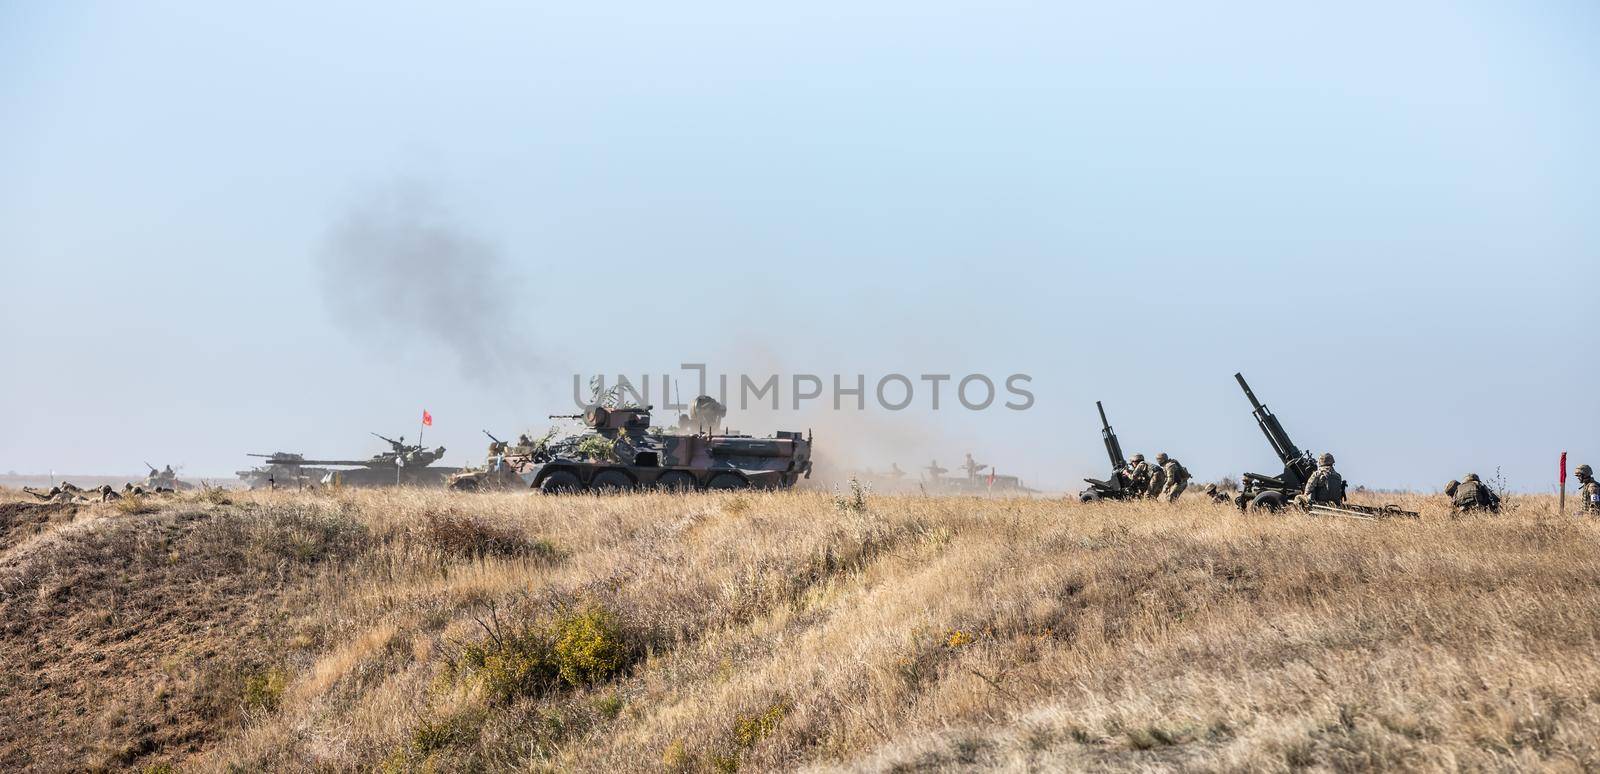 DONETSK REG, UKRAINE - Okt 12, 2018: Military equipment at a military training ground during complex tactical exercises of diverse military forces for the defense of coastal area in the Donetsk region